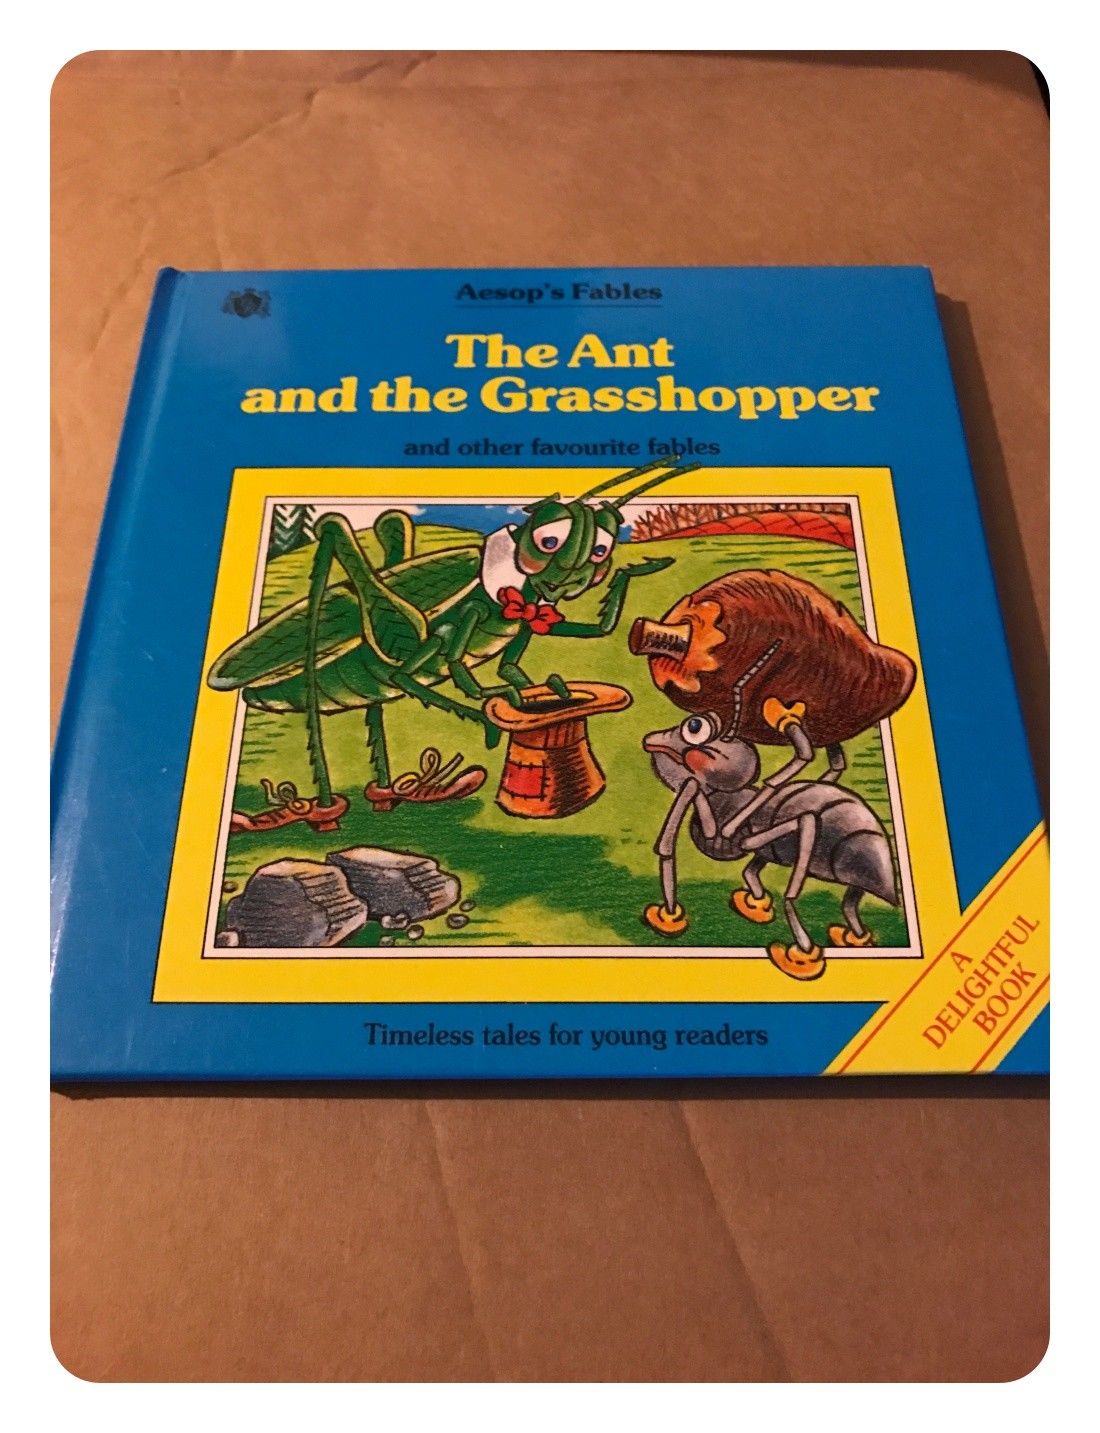 Aesops's Fables : The Ant & the Grasshopper and Other Favourite Fables (1986)